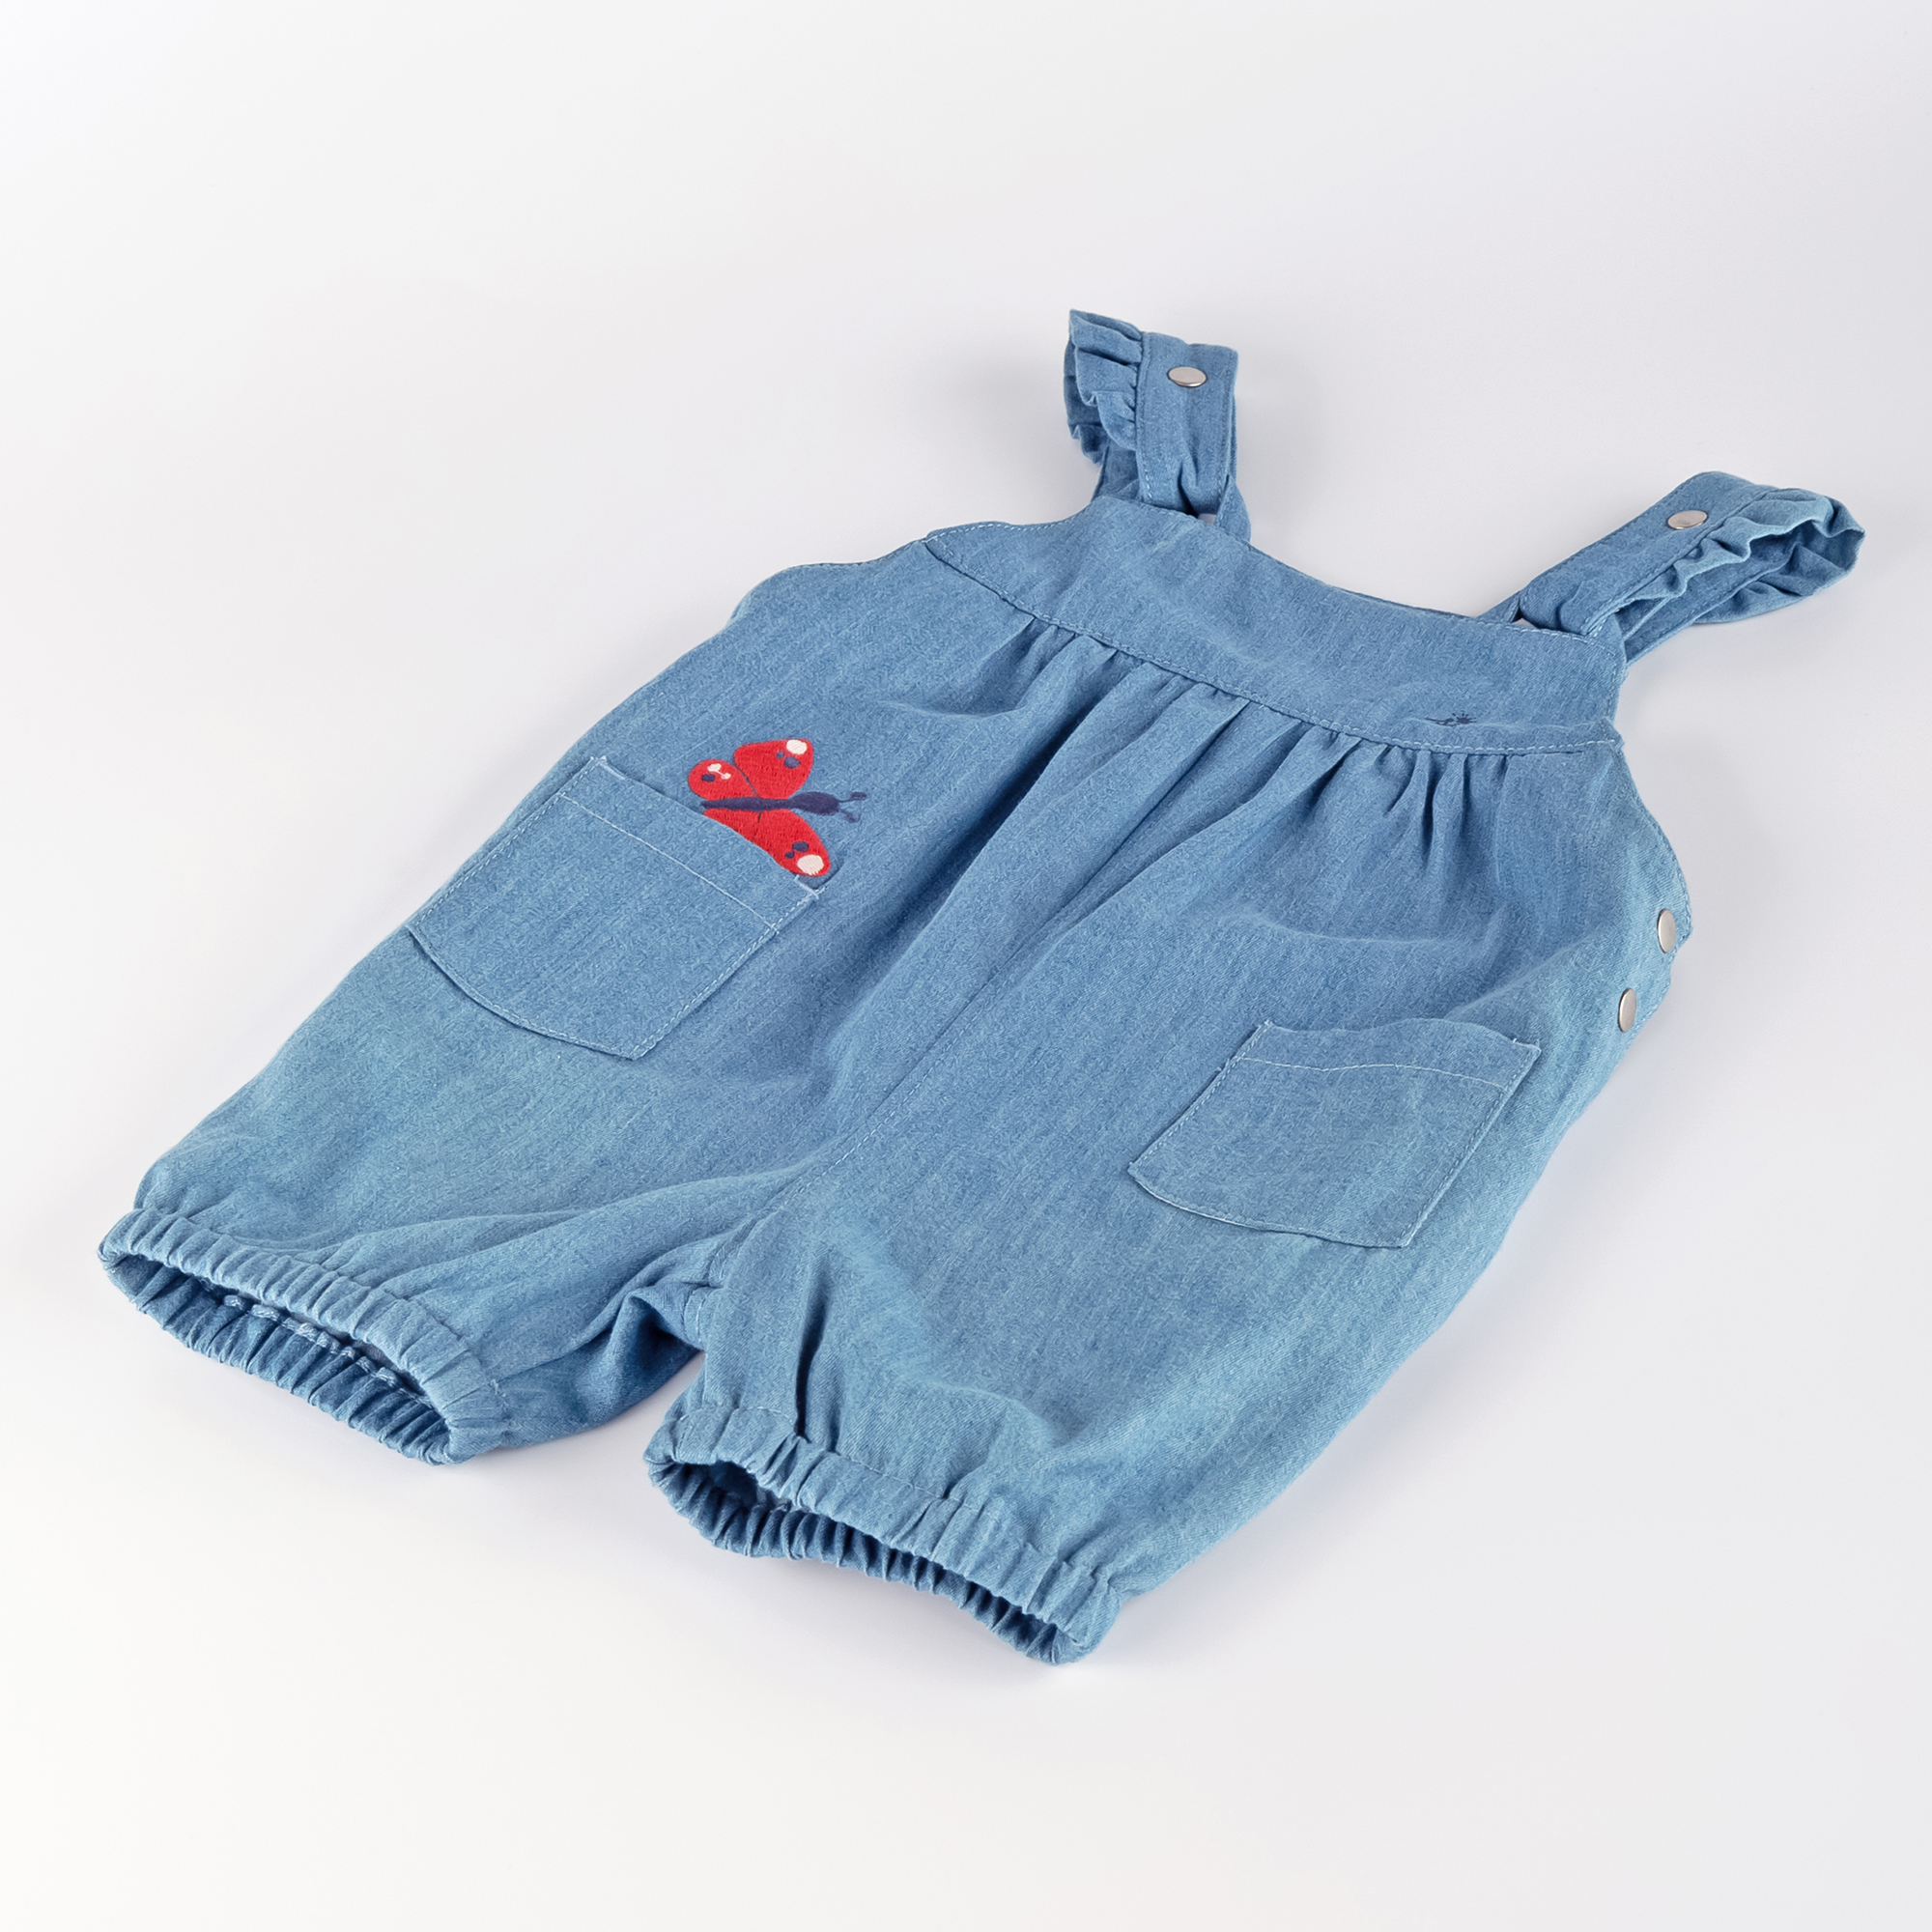 Short jeans blue baby dungarees butterfly